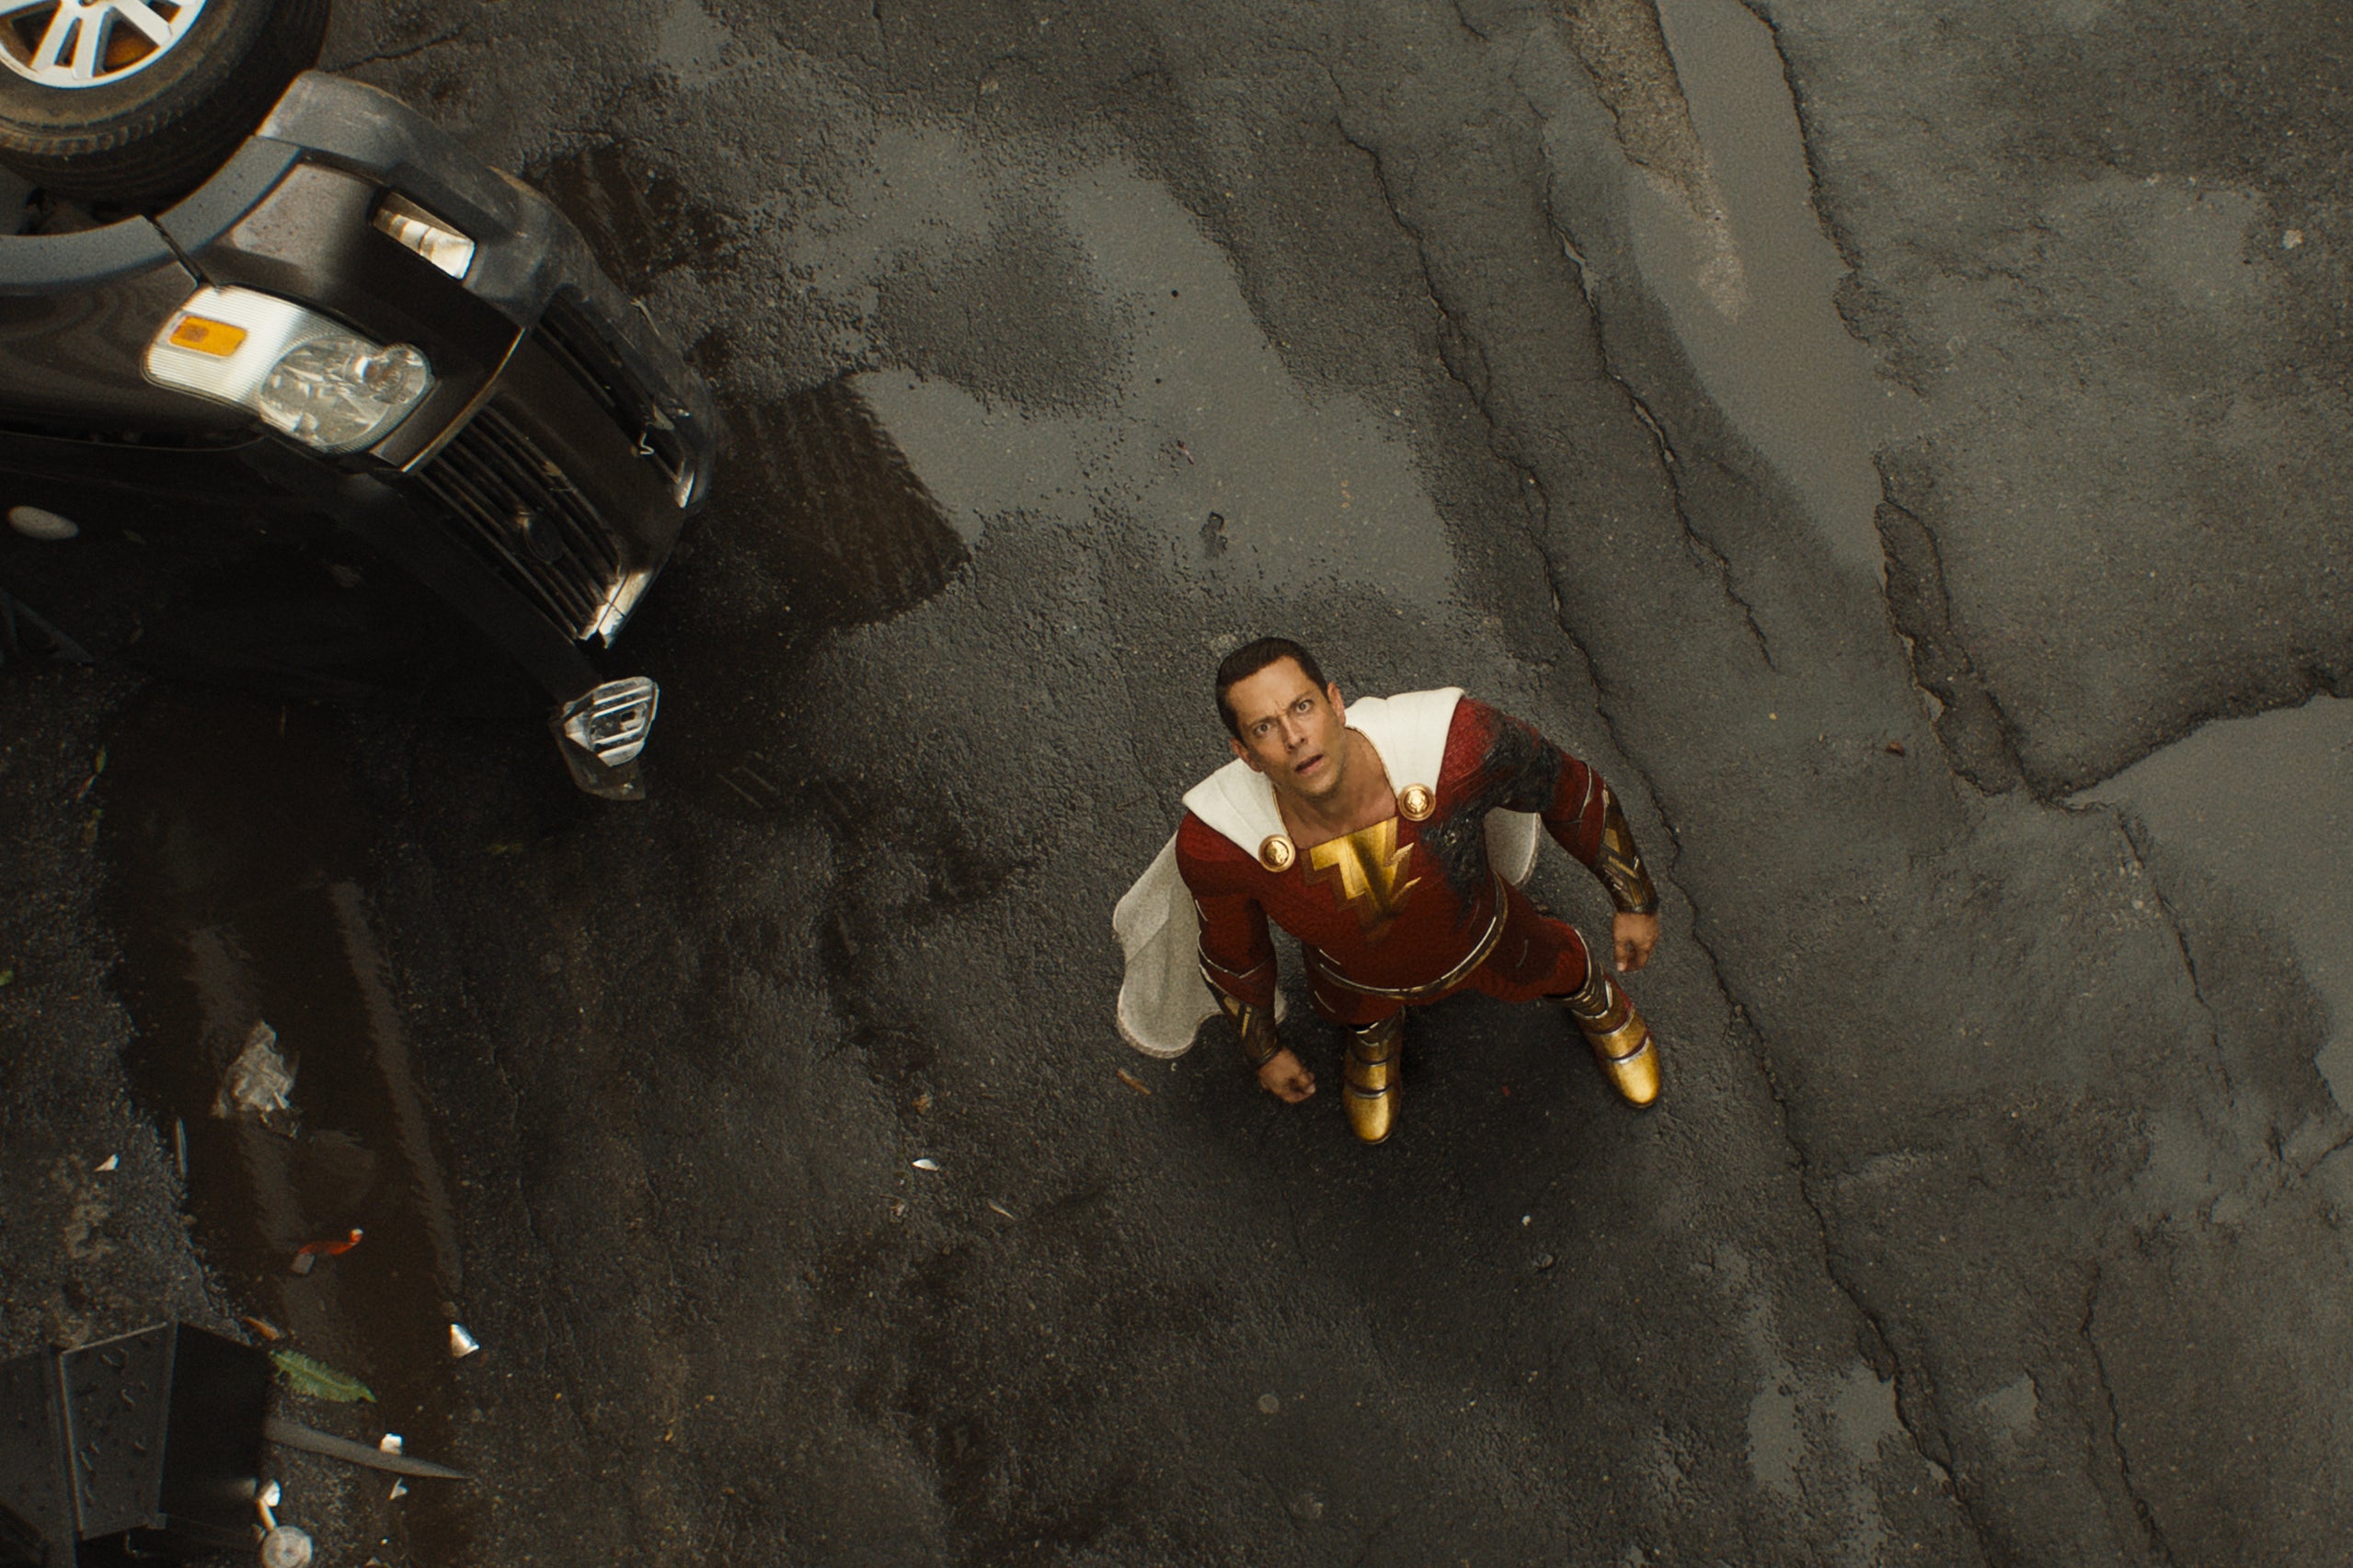 An overhead shot shows the actor standing on the pavement in his red supersuit, next to an overturned car, looking at the sky with concern.